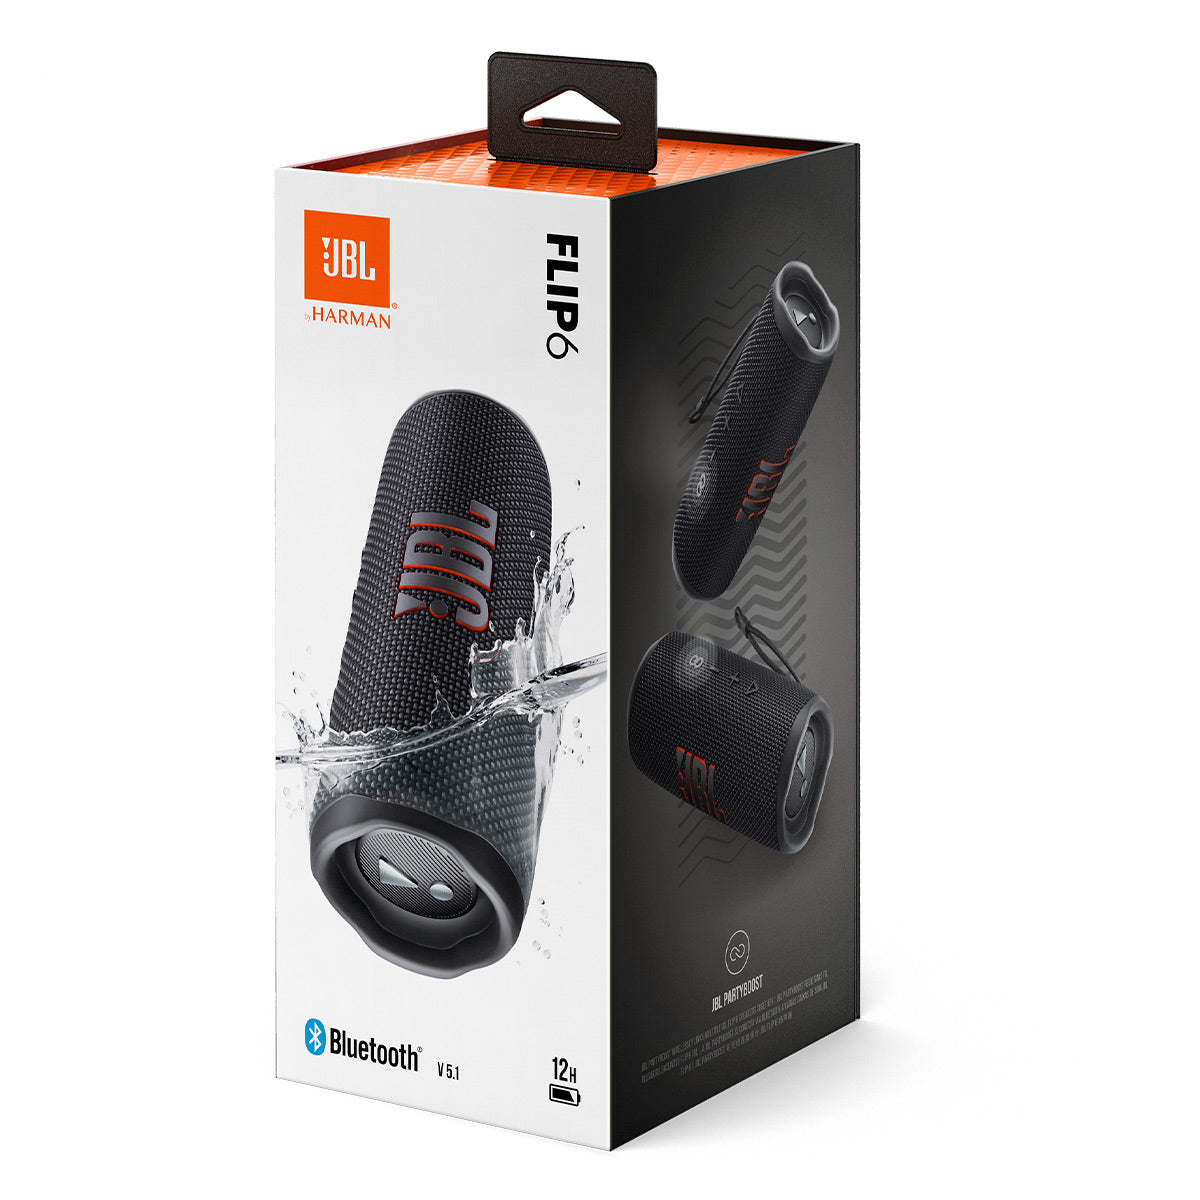 JBL Flip 5 (14 stores) find the best price • Compare now »